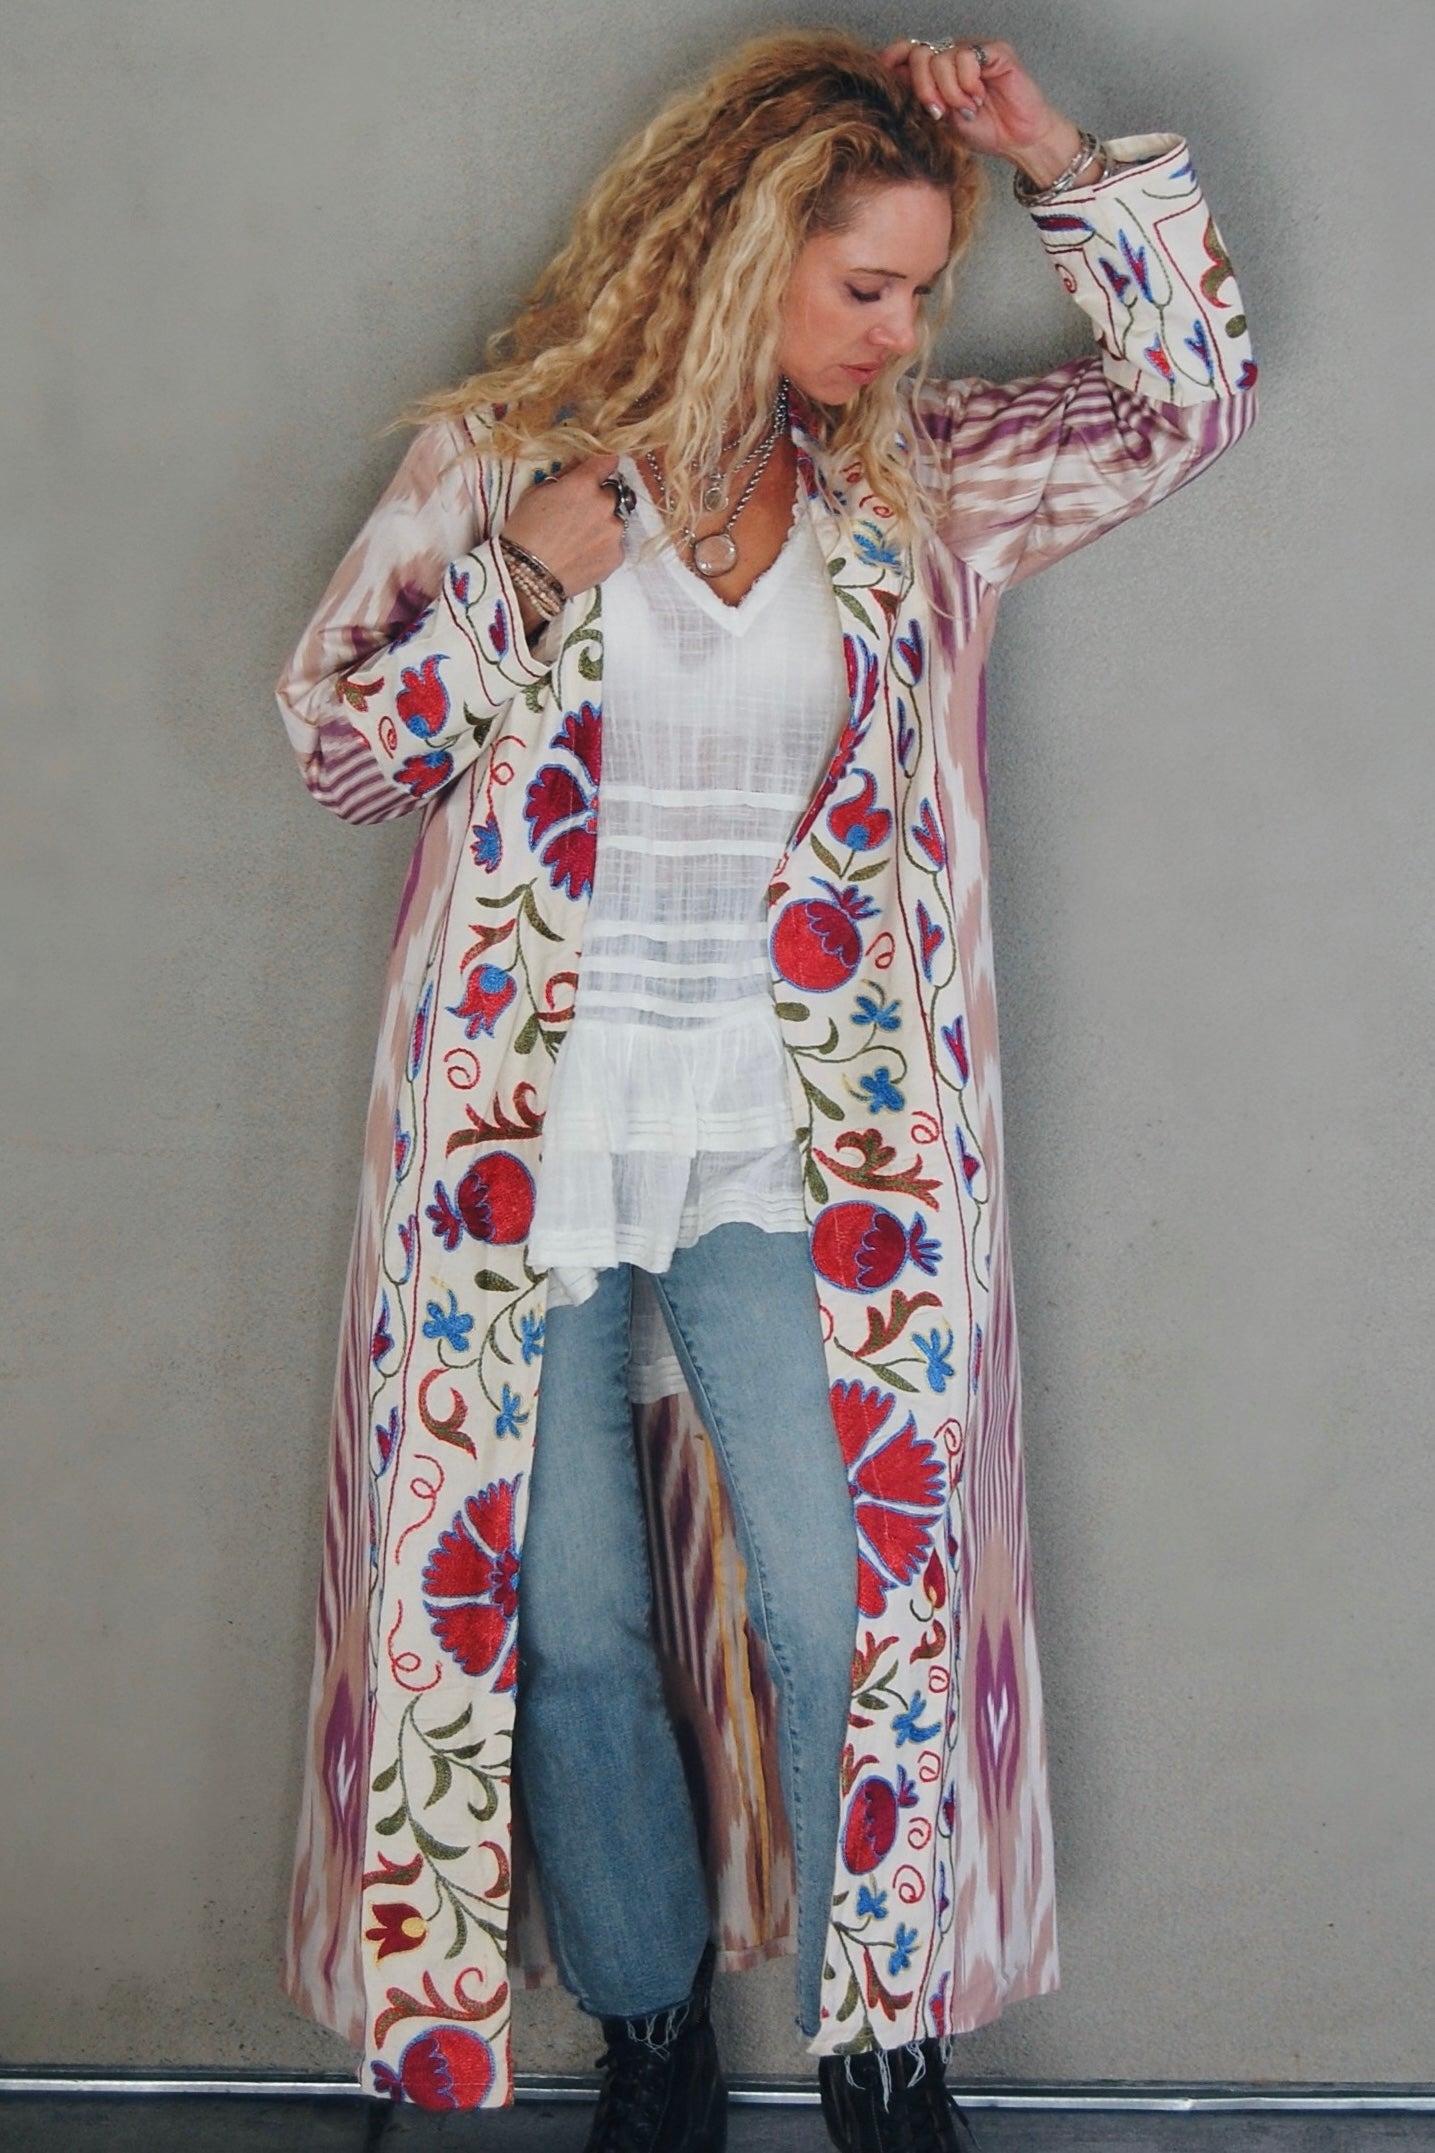 Load image into Gallery viewer, The Ellis Jacket in Whimsical - SpiritedBoutiques Boho Hippie Boutique Style Jacket, Spirited
